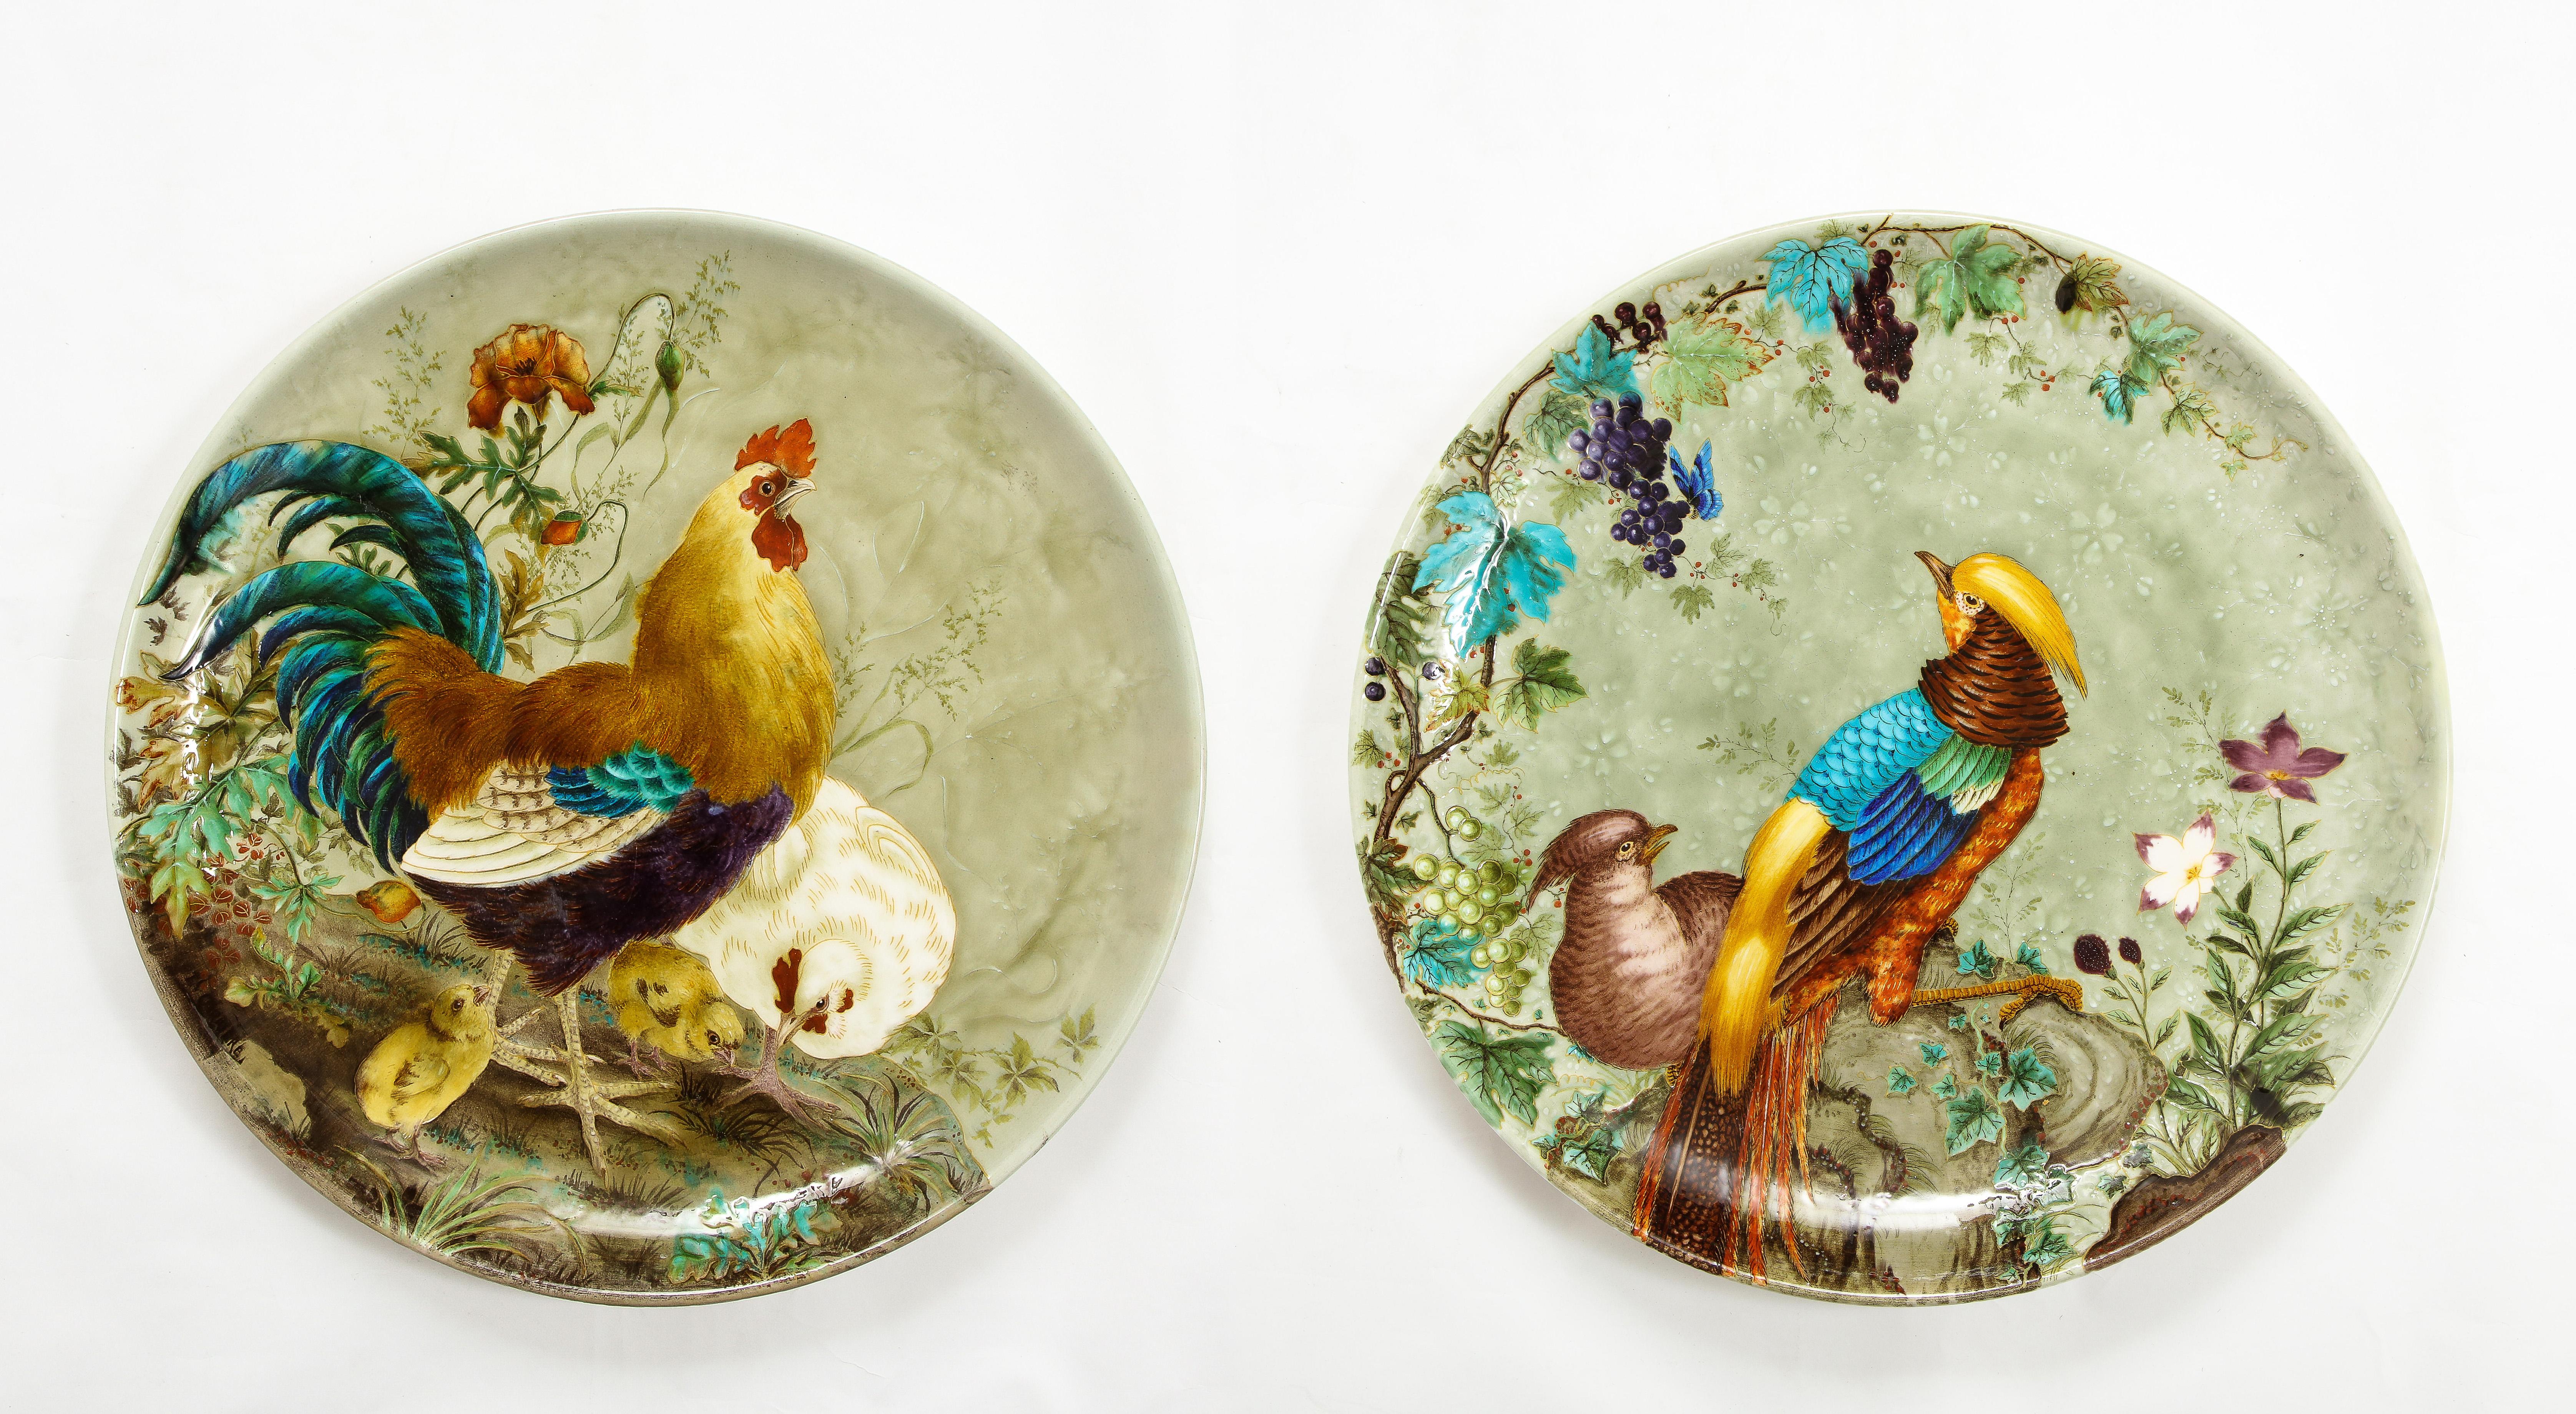 A Monumental fantastic quality pair of french 19th century Theodore deck earthenware poly-chrome enamel chargers, signed Ernest Carrière. Each of these is absolutely gorgeous with the best hand-painted enamel by one of the best artists from the